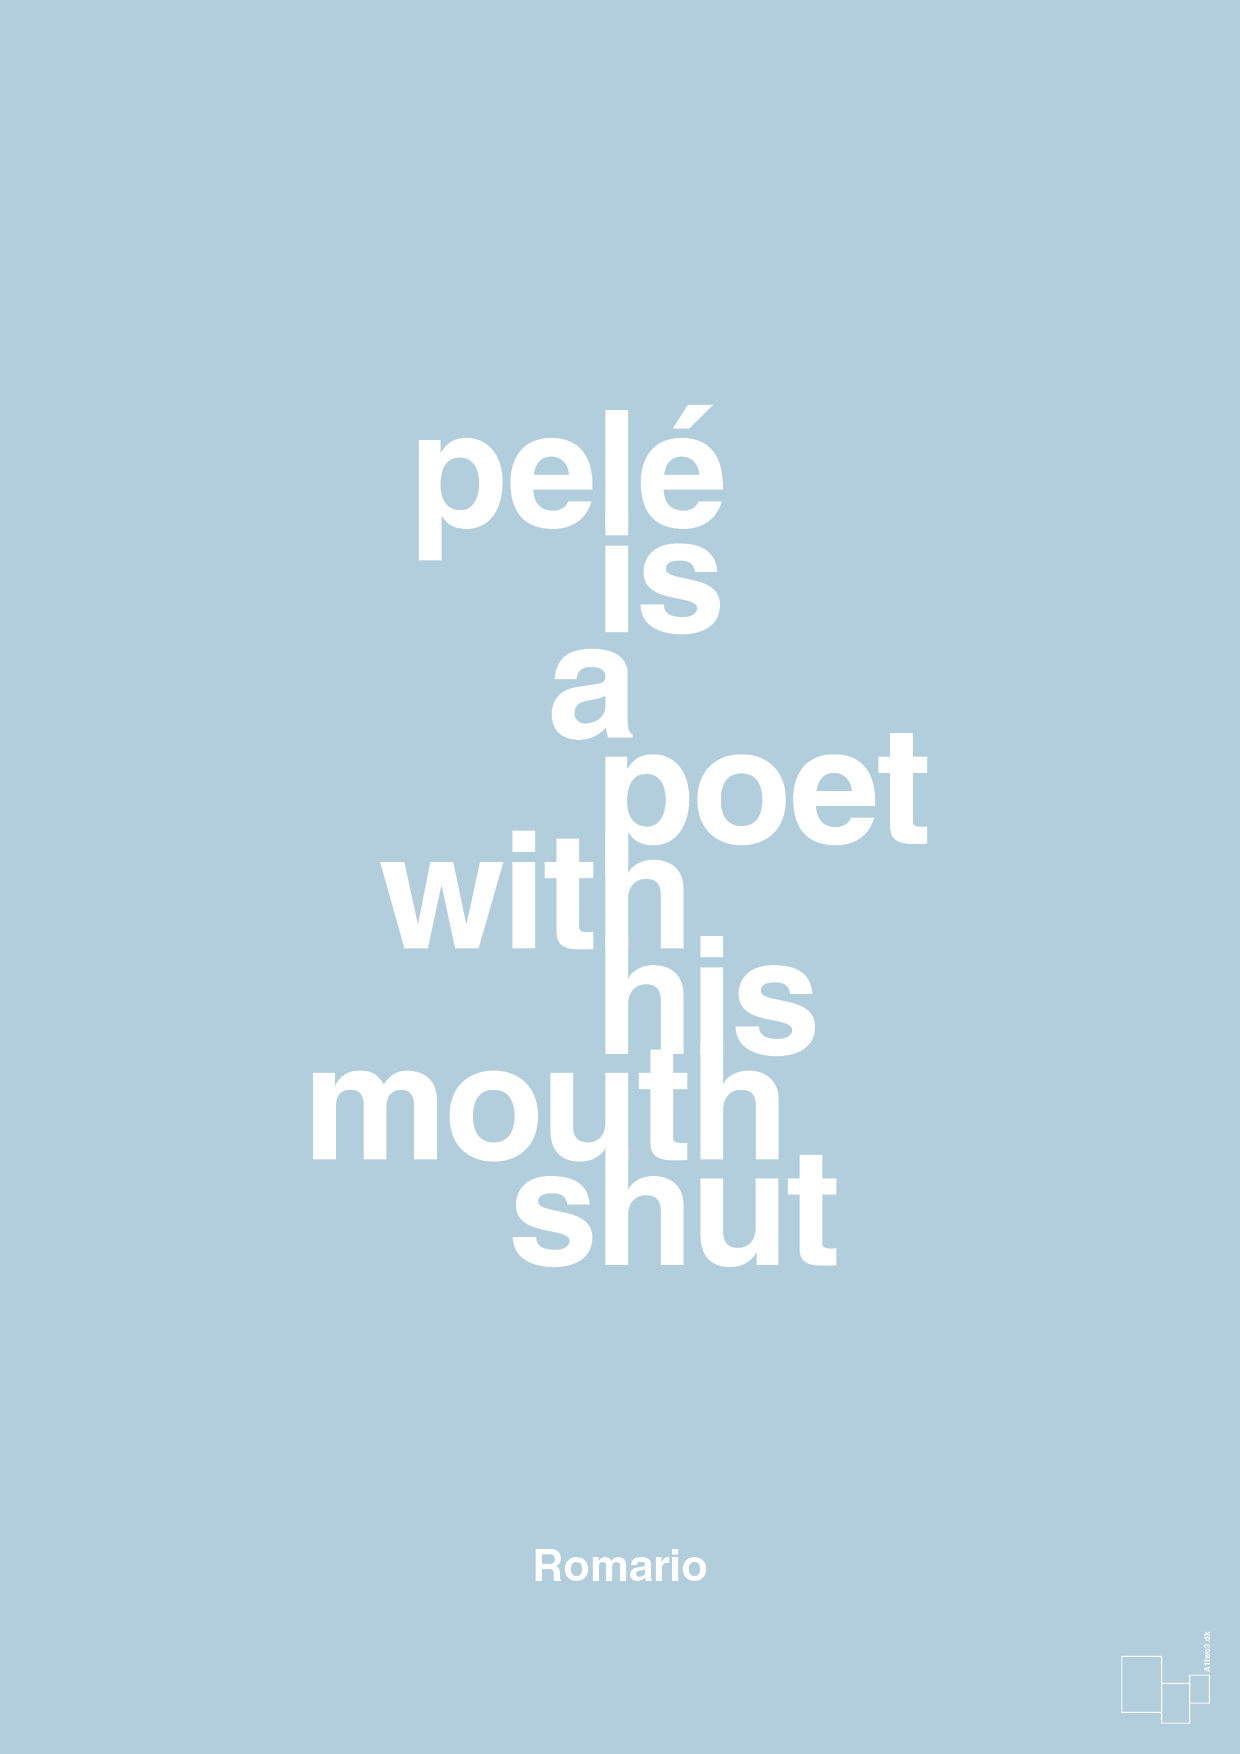 pelé is a poet with his mouth shut - Plakat med Citater i Heavenly Blue